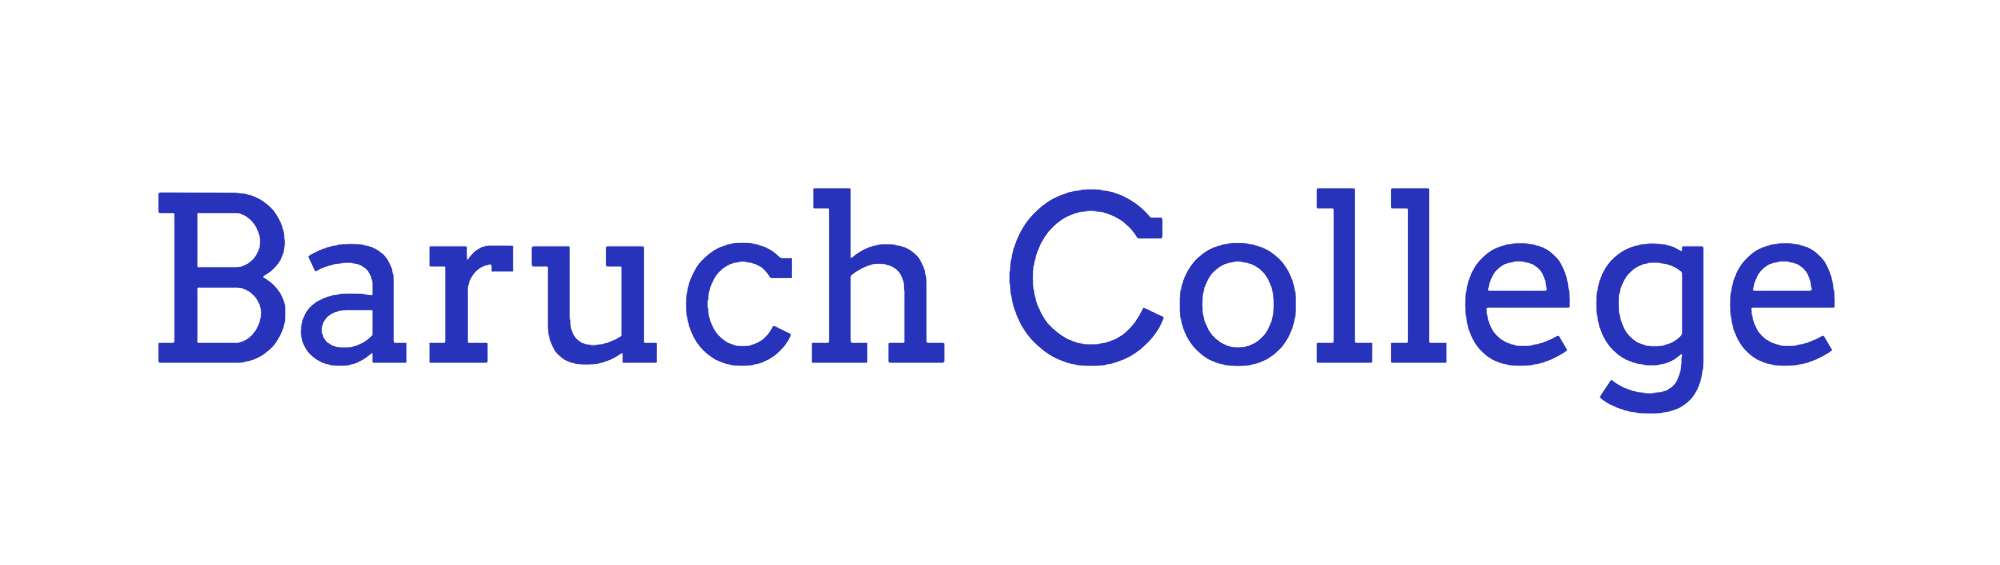 Baruch College-logo.png